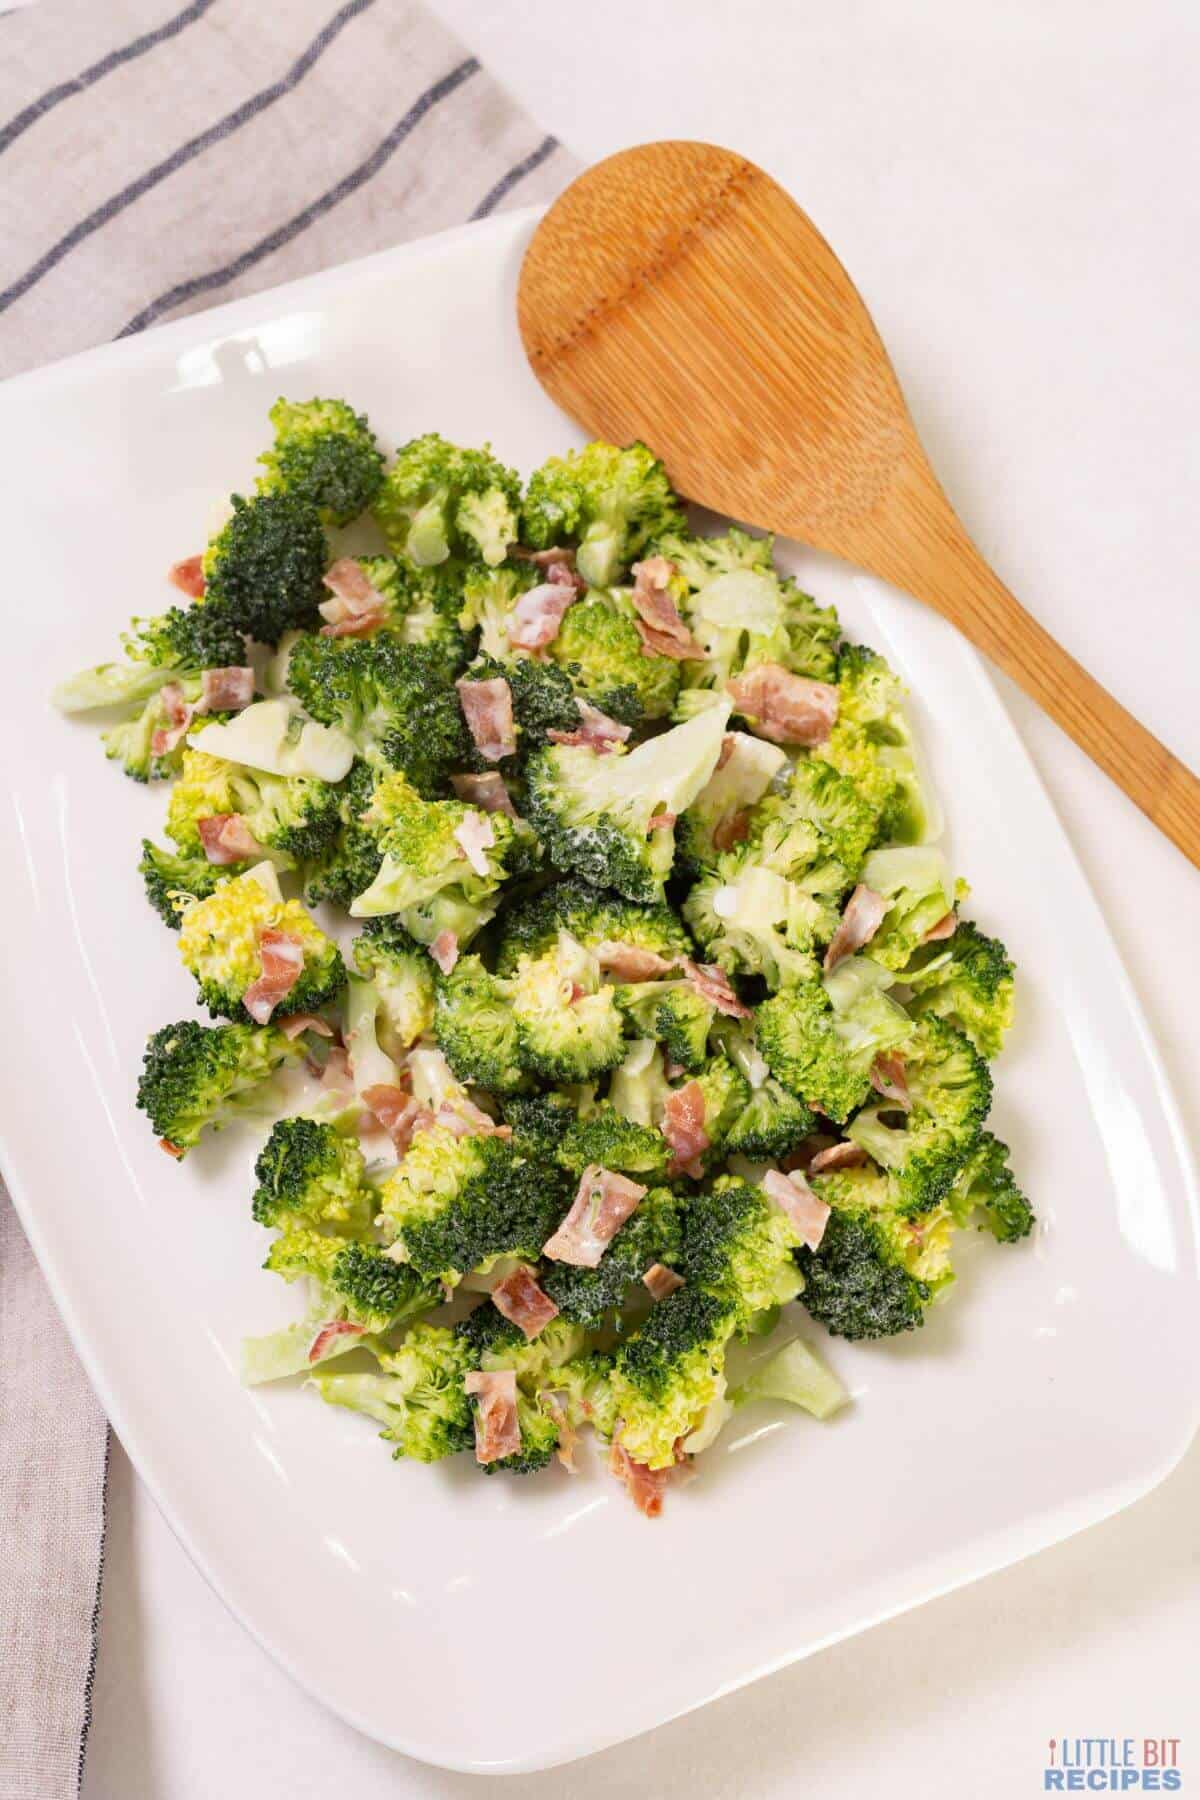 broccoli salad on platter with wooden spoon.